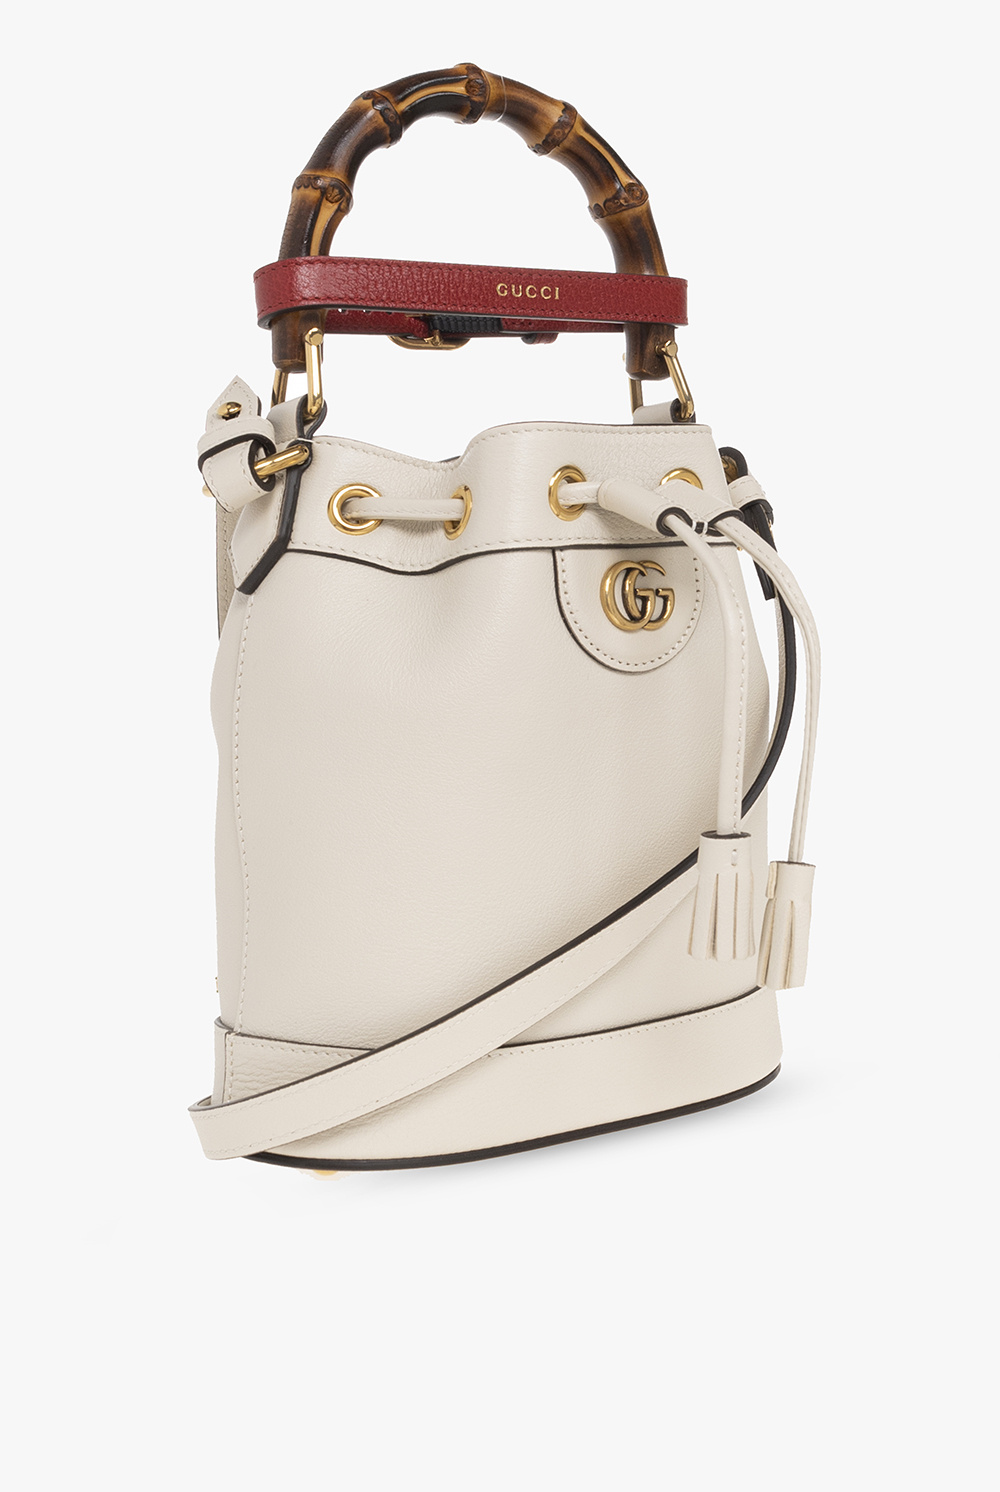 Gucci's Diana Bag Is A Timeless Classic For A Reason